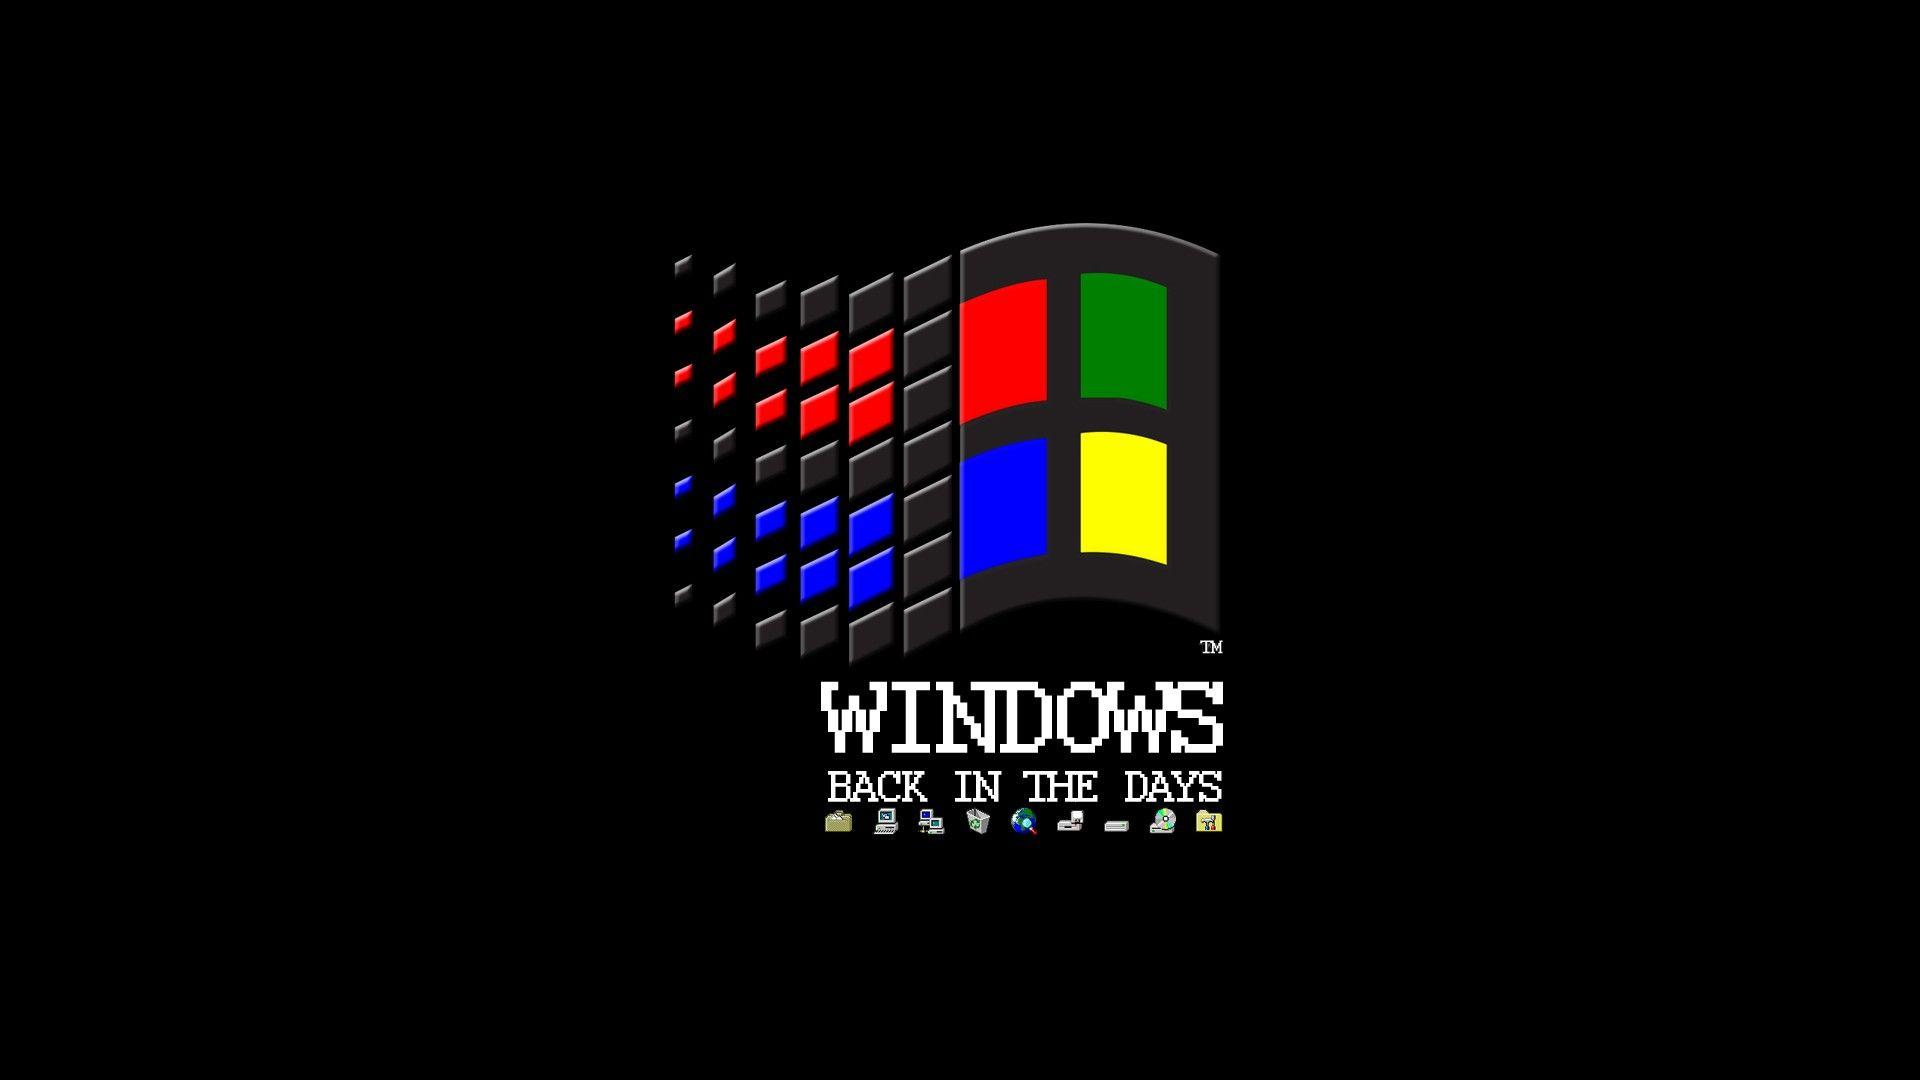 Old Windows Wallpaper Group Picture